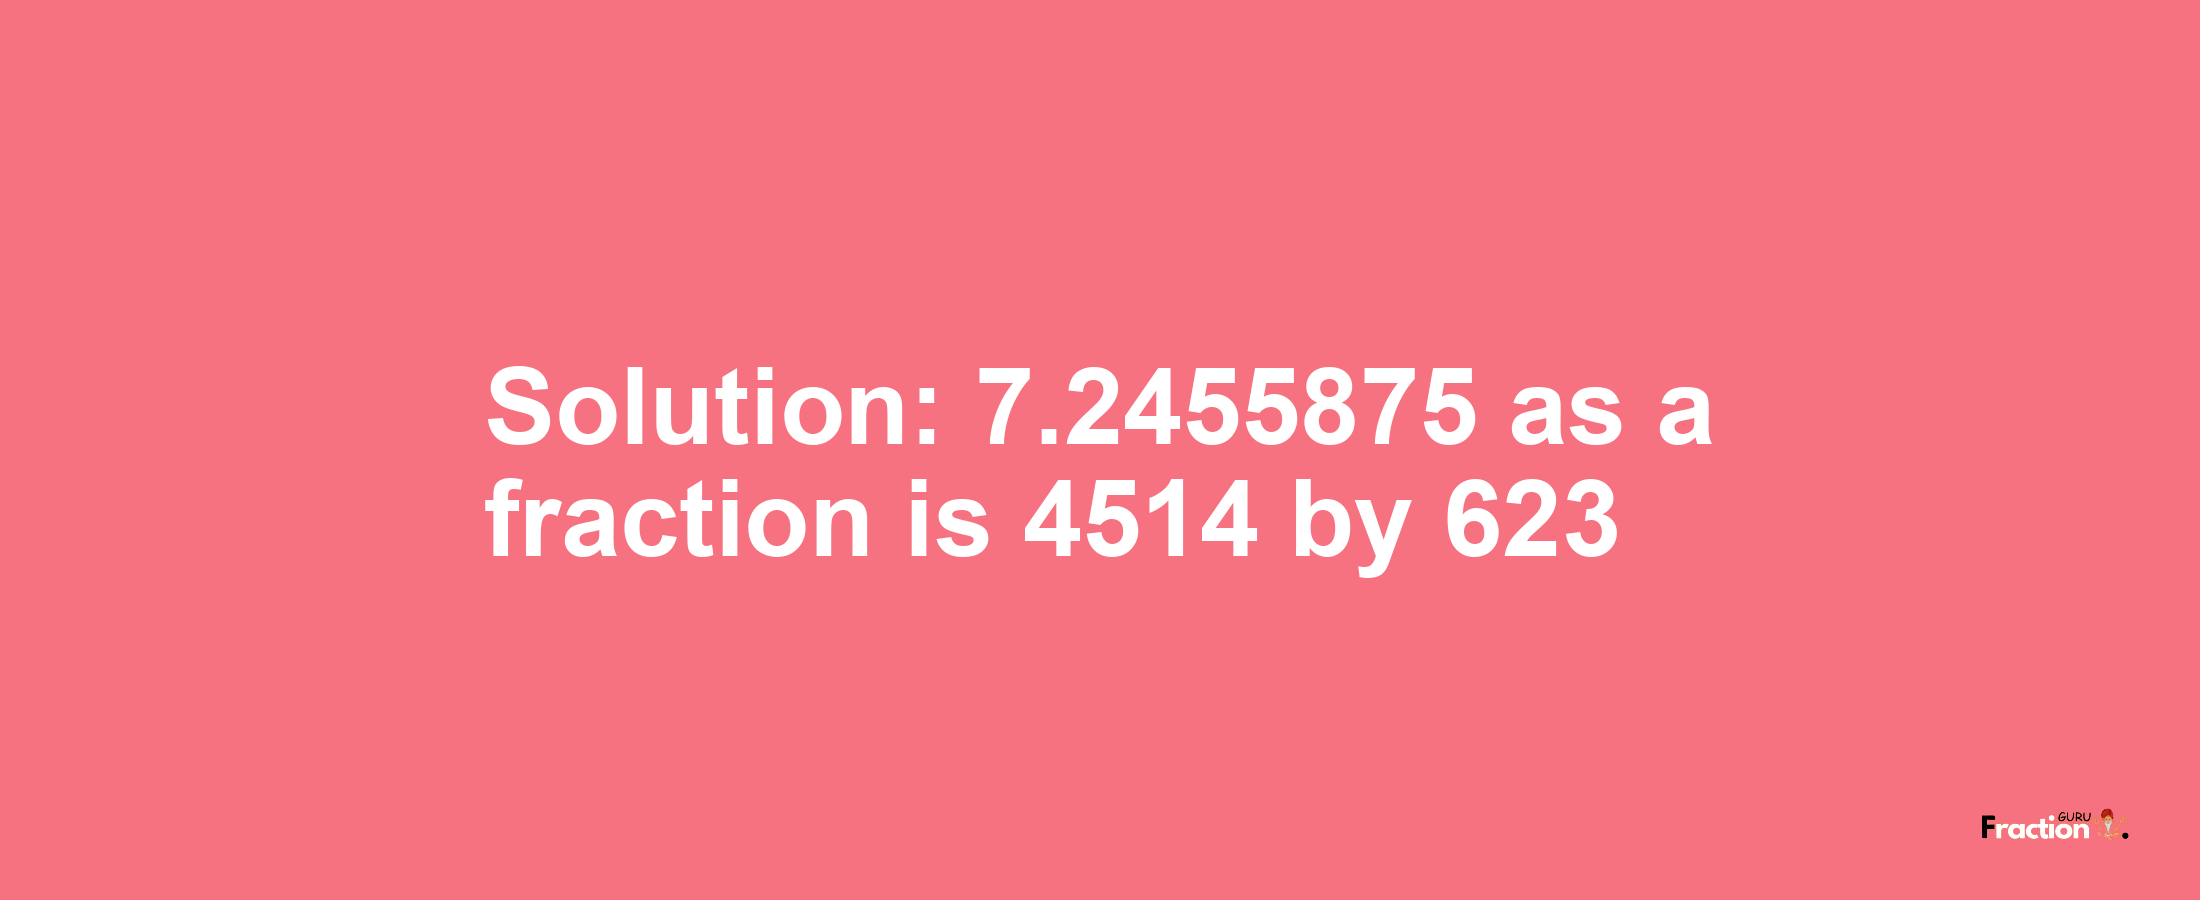 Solution:7.2455875 as a fraction is 4514/623